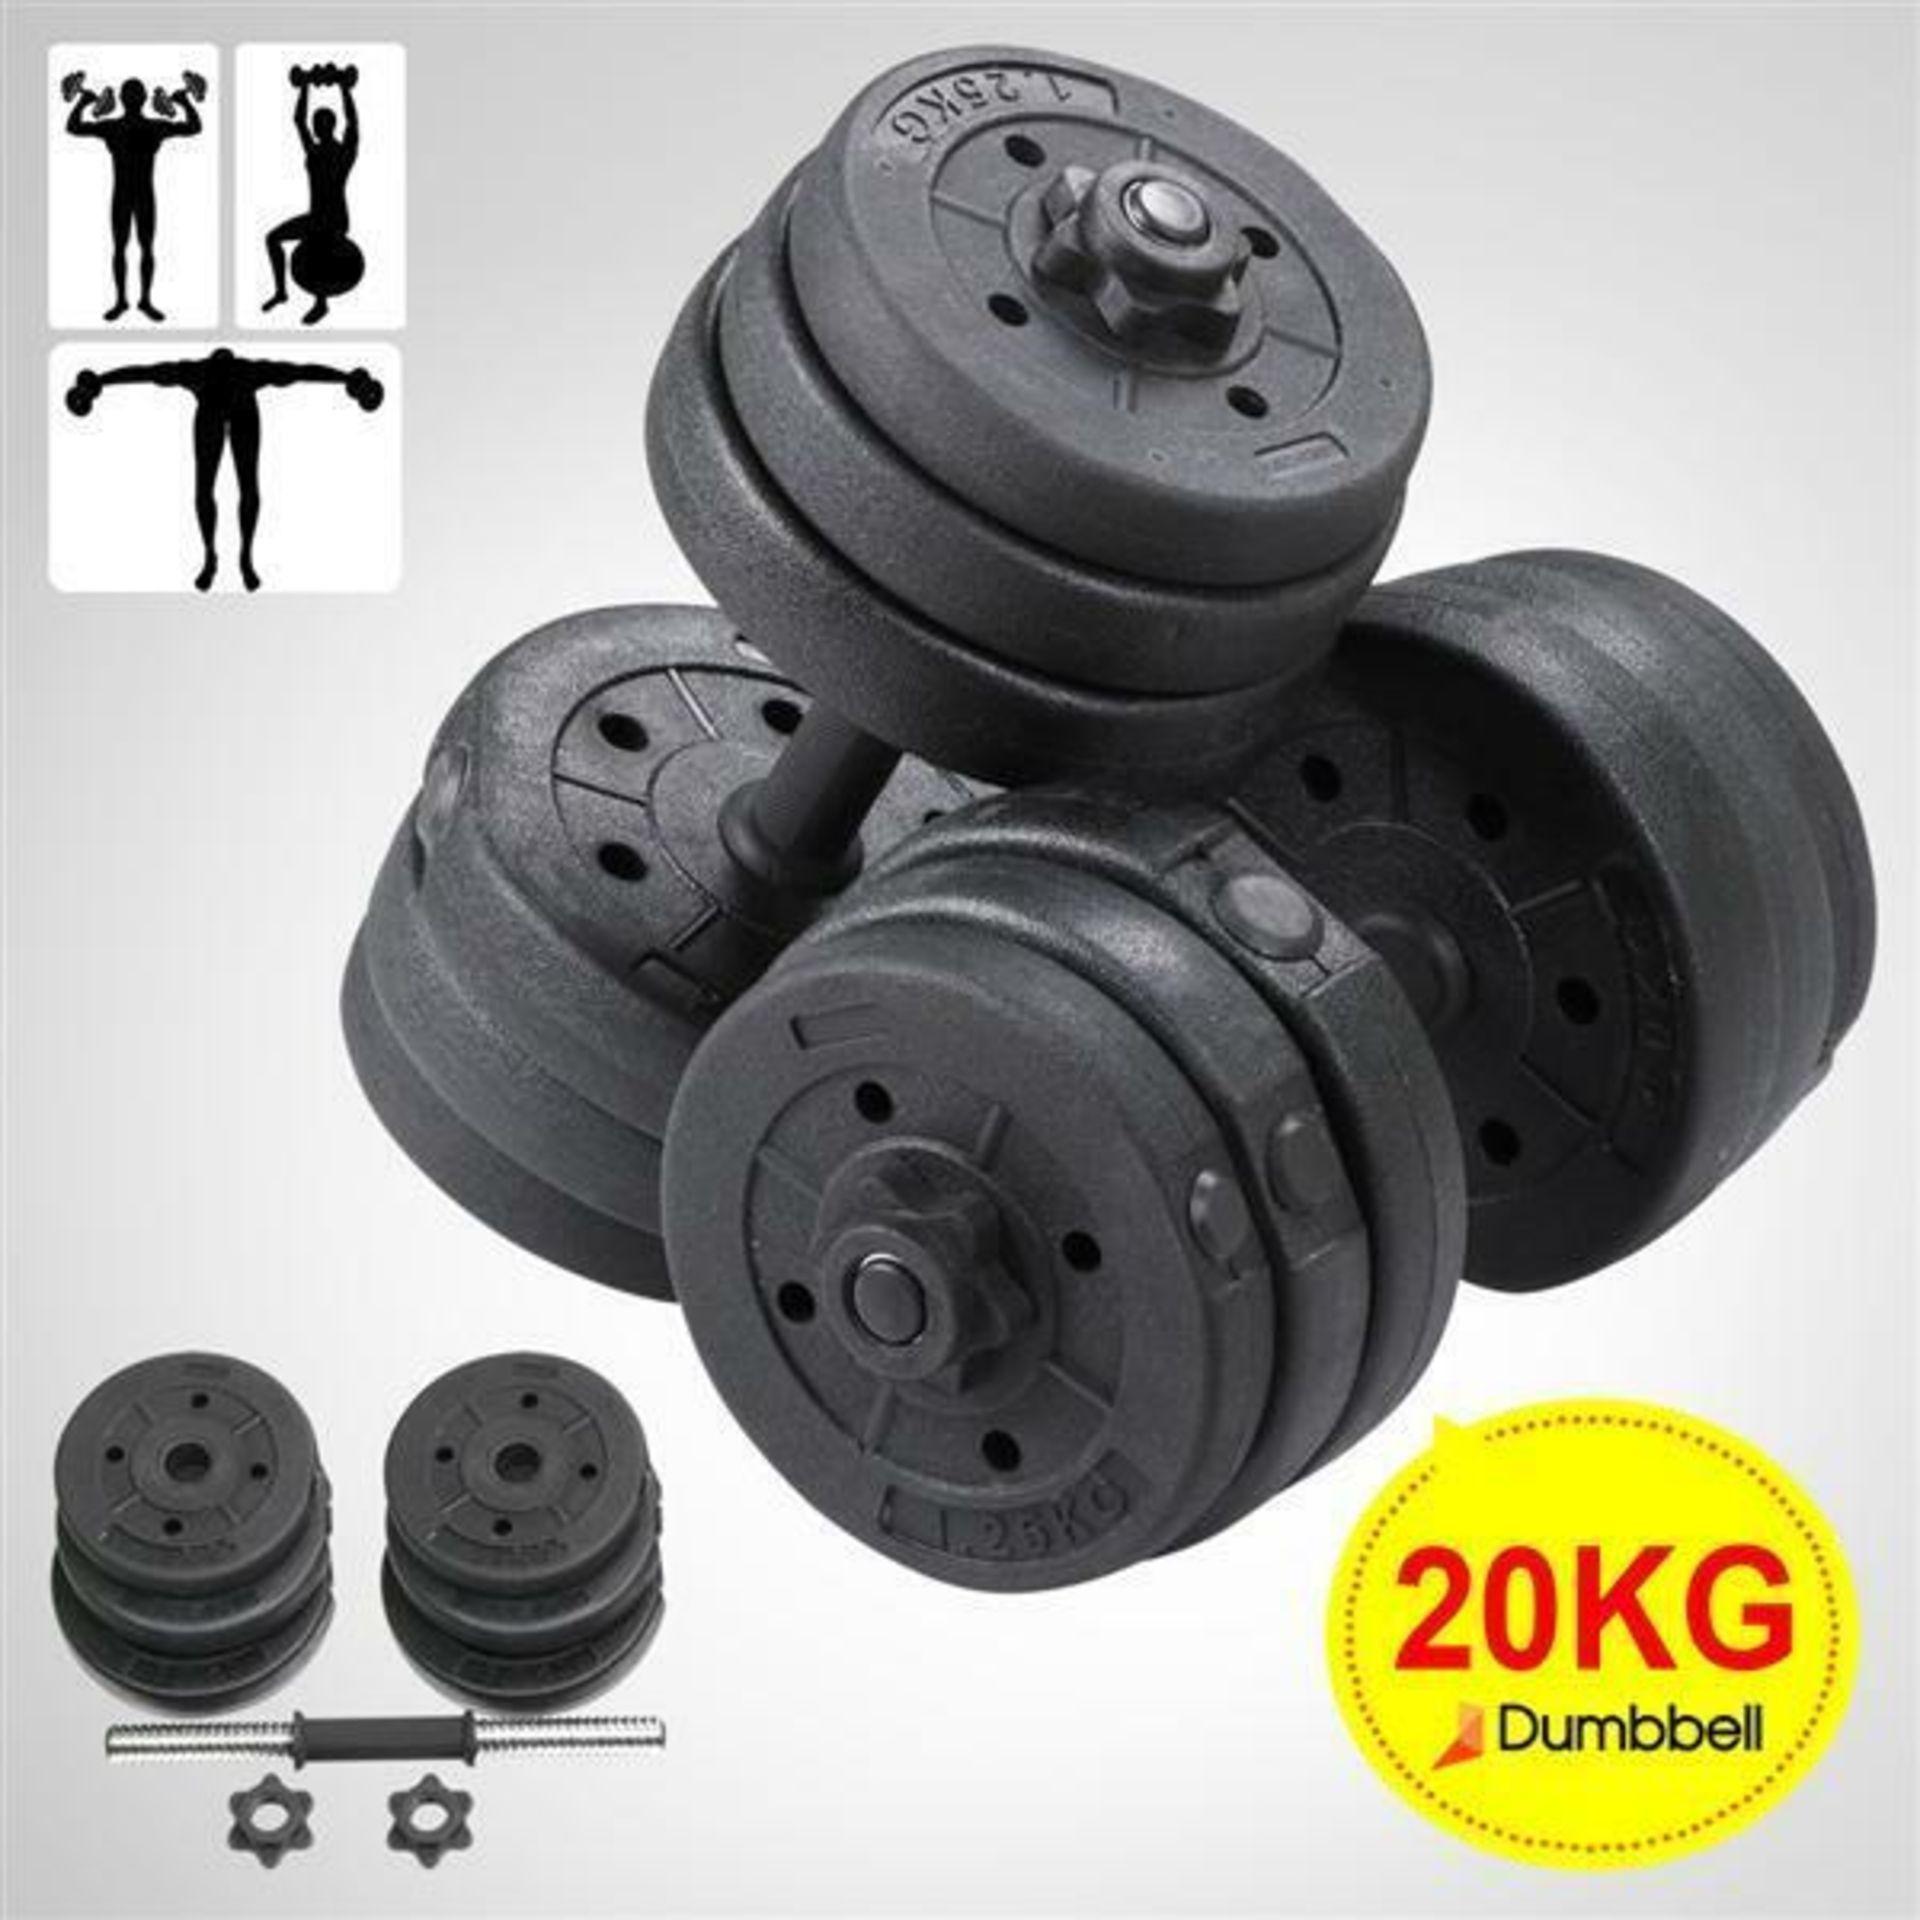 PALLET TO CONTAIN 36 x SETS OF 2 - 20KG ADJUSTABLE WEIGHT DUMBBELL SETS. (PALLET ID: 38I) EACH SET